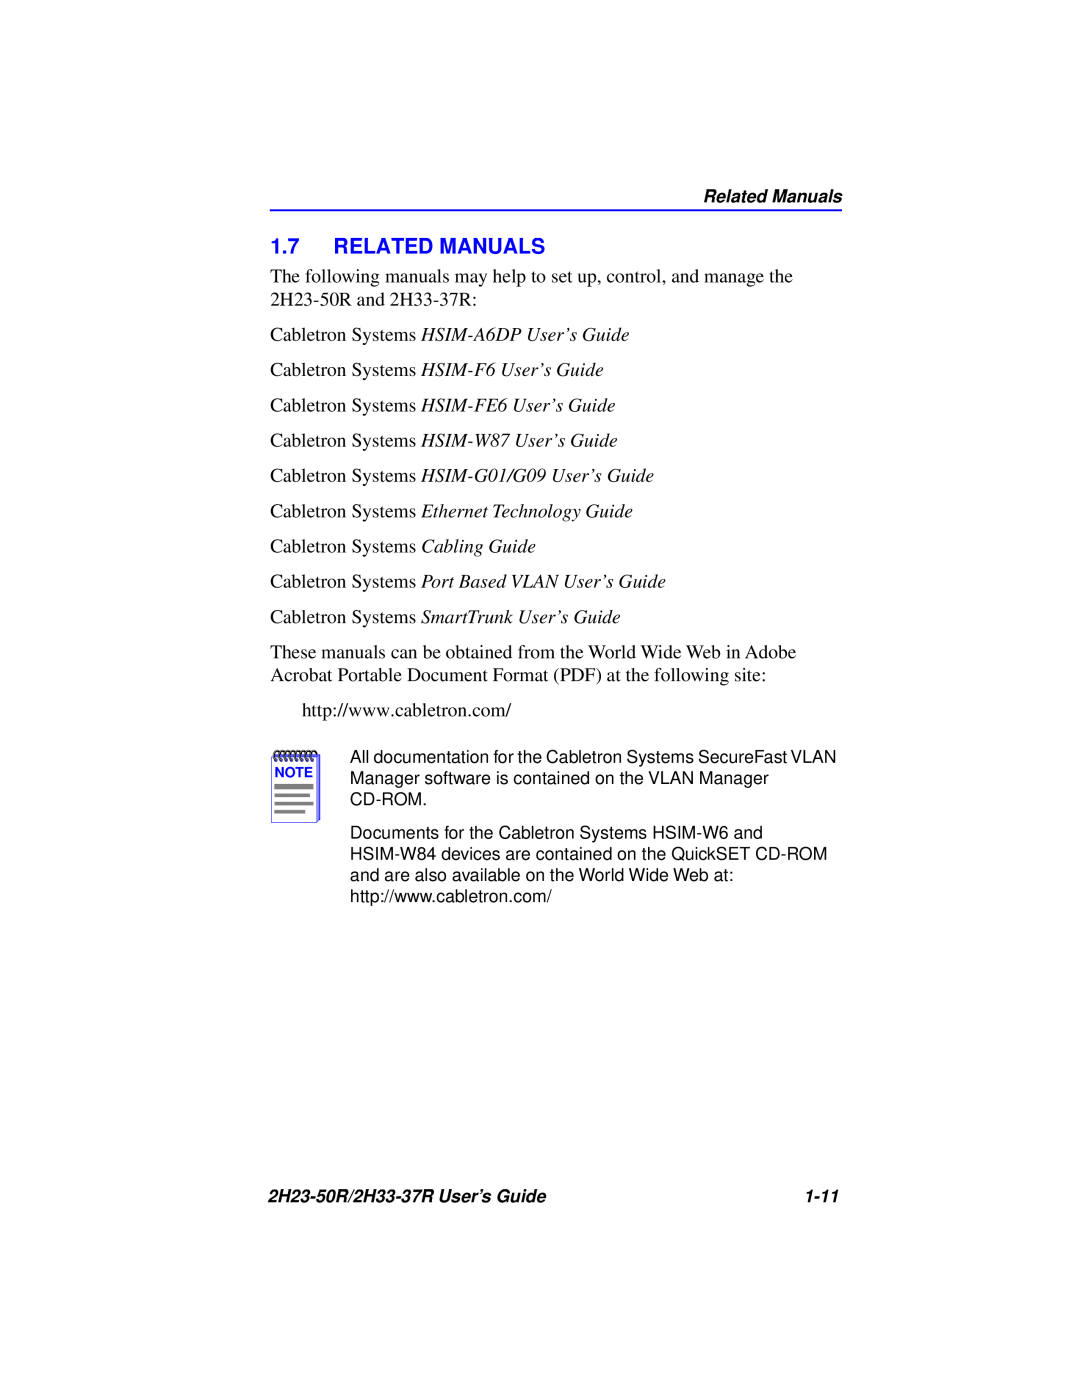 Cabletron Systems 2H23-50R, 2H33-37R manual Related Manuals 